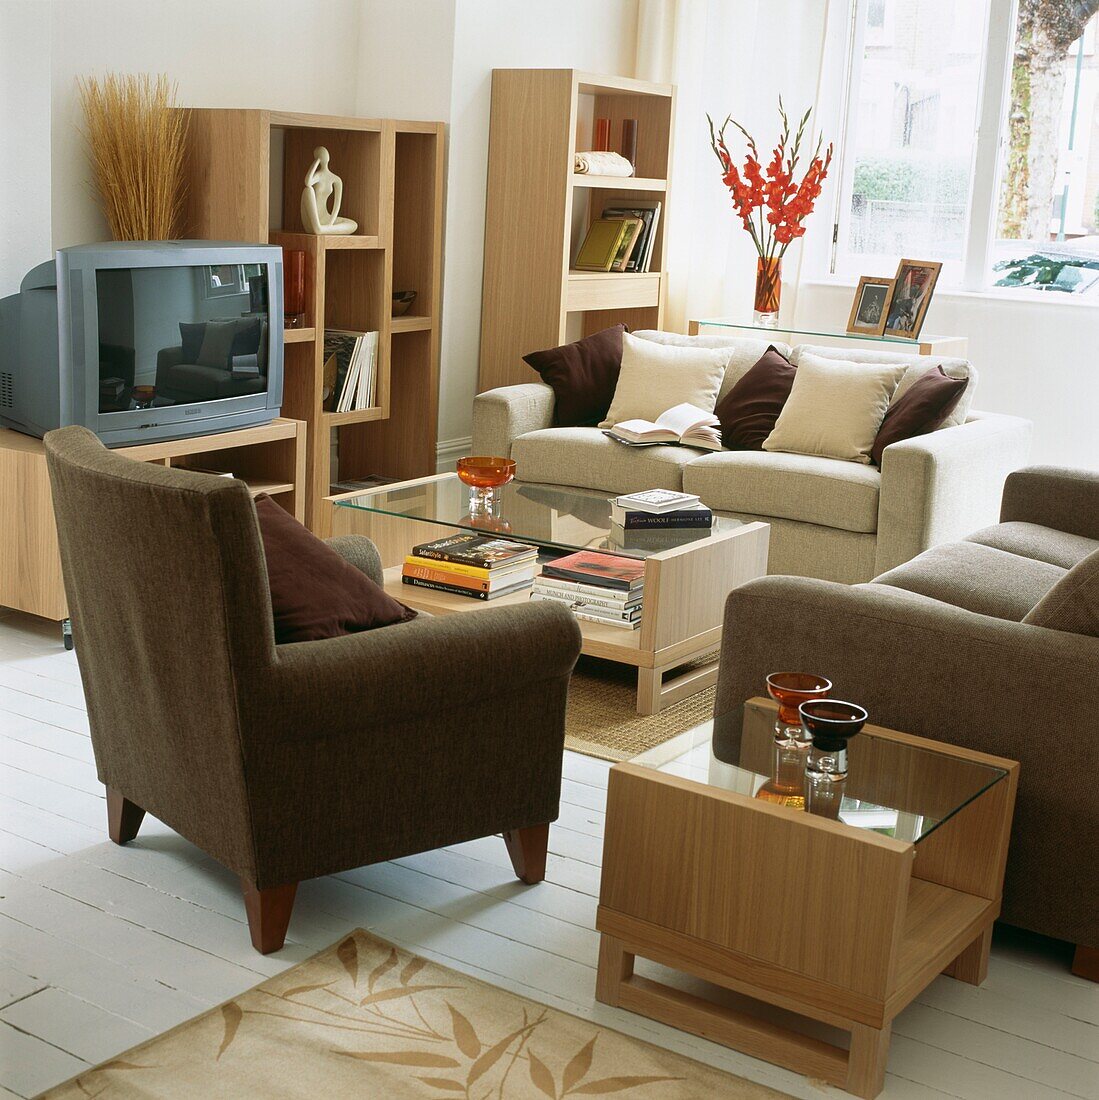 Seating area with glass toped coffee table and television